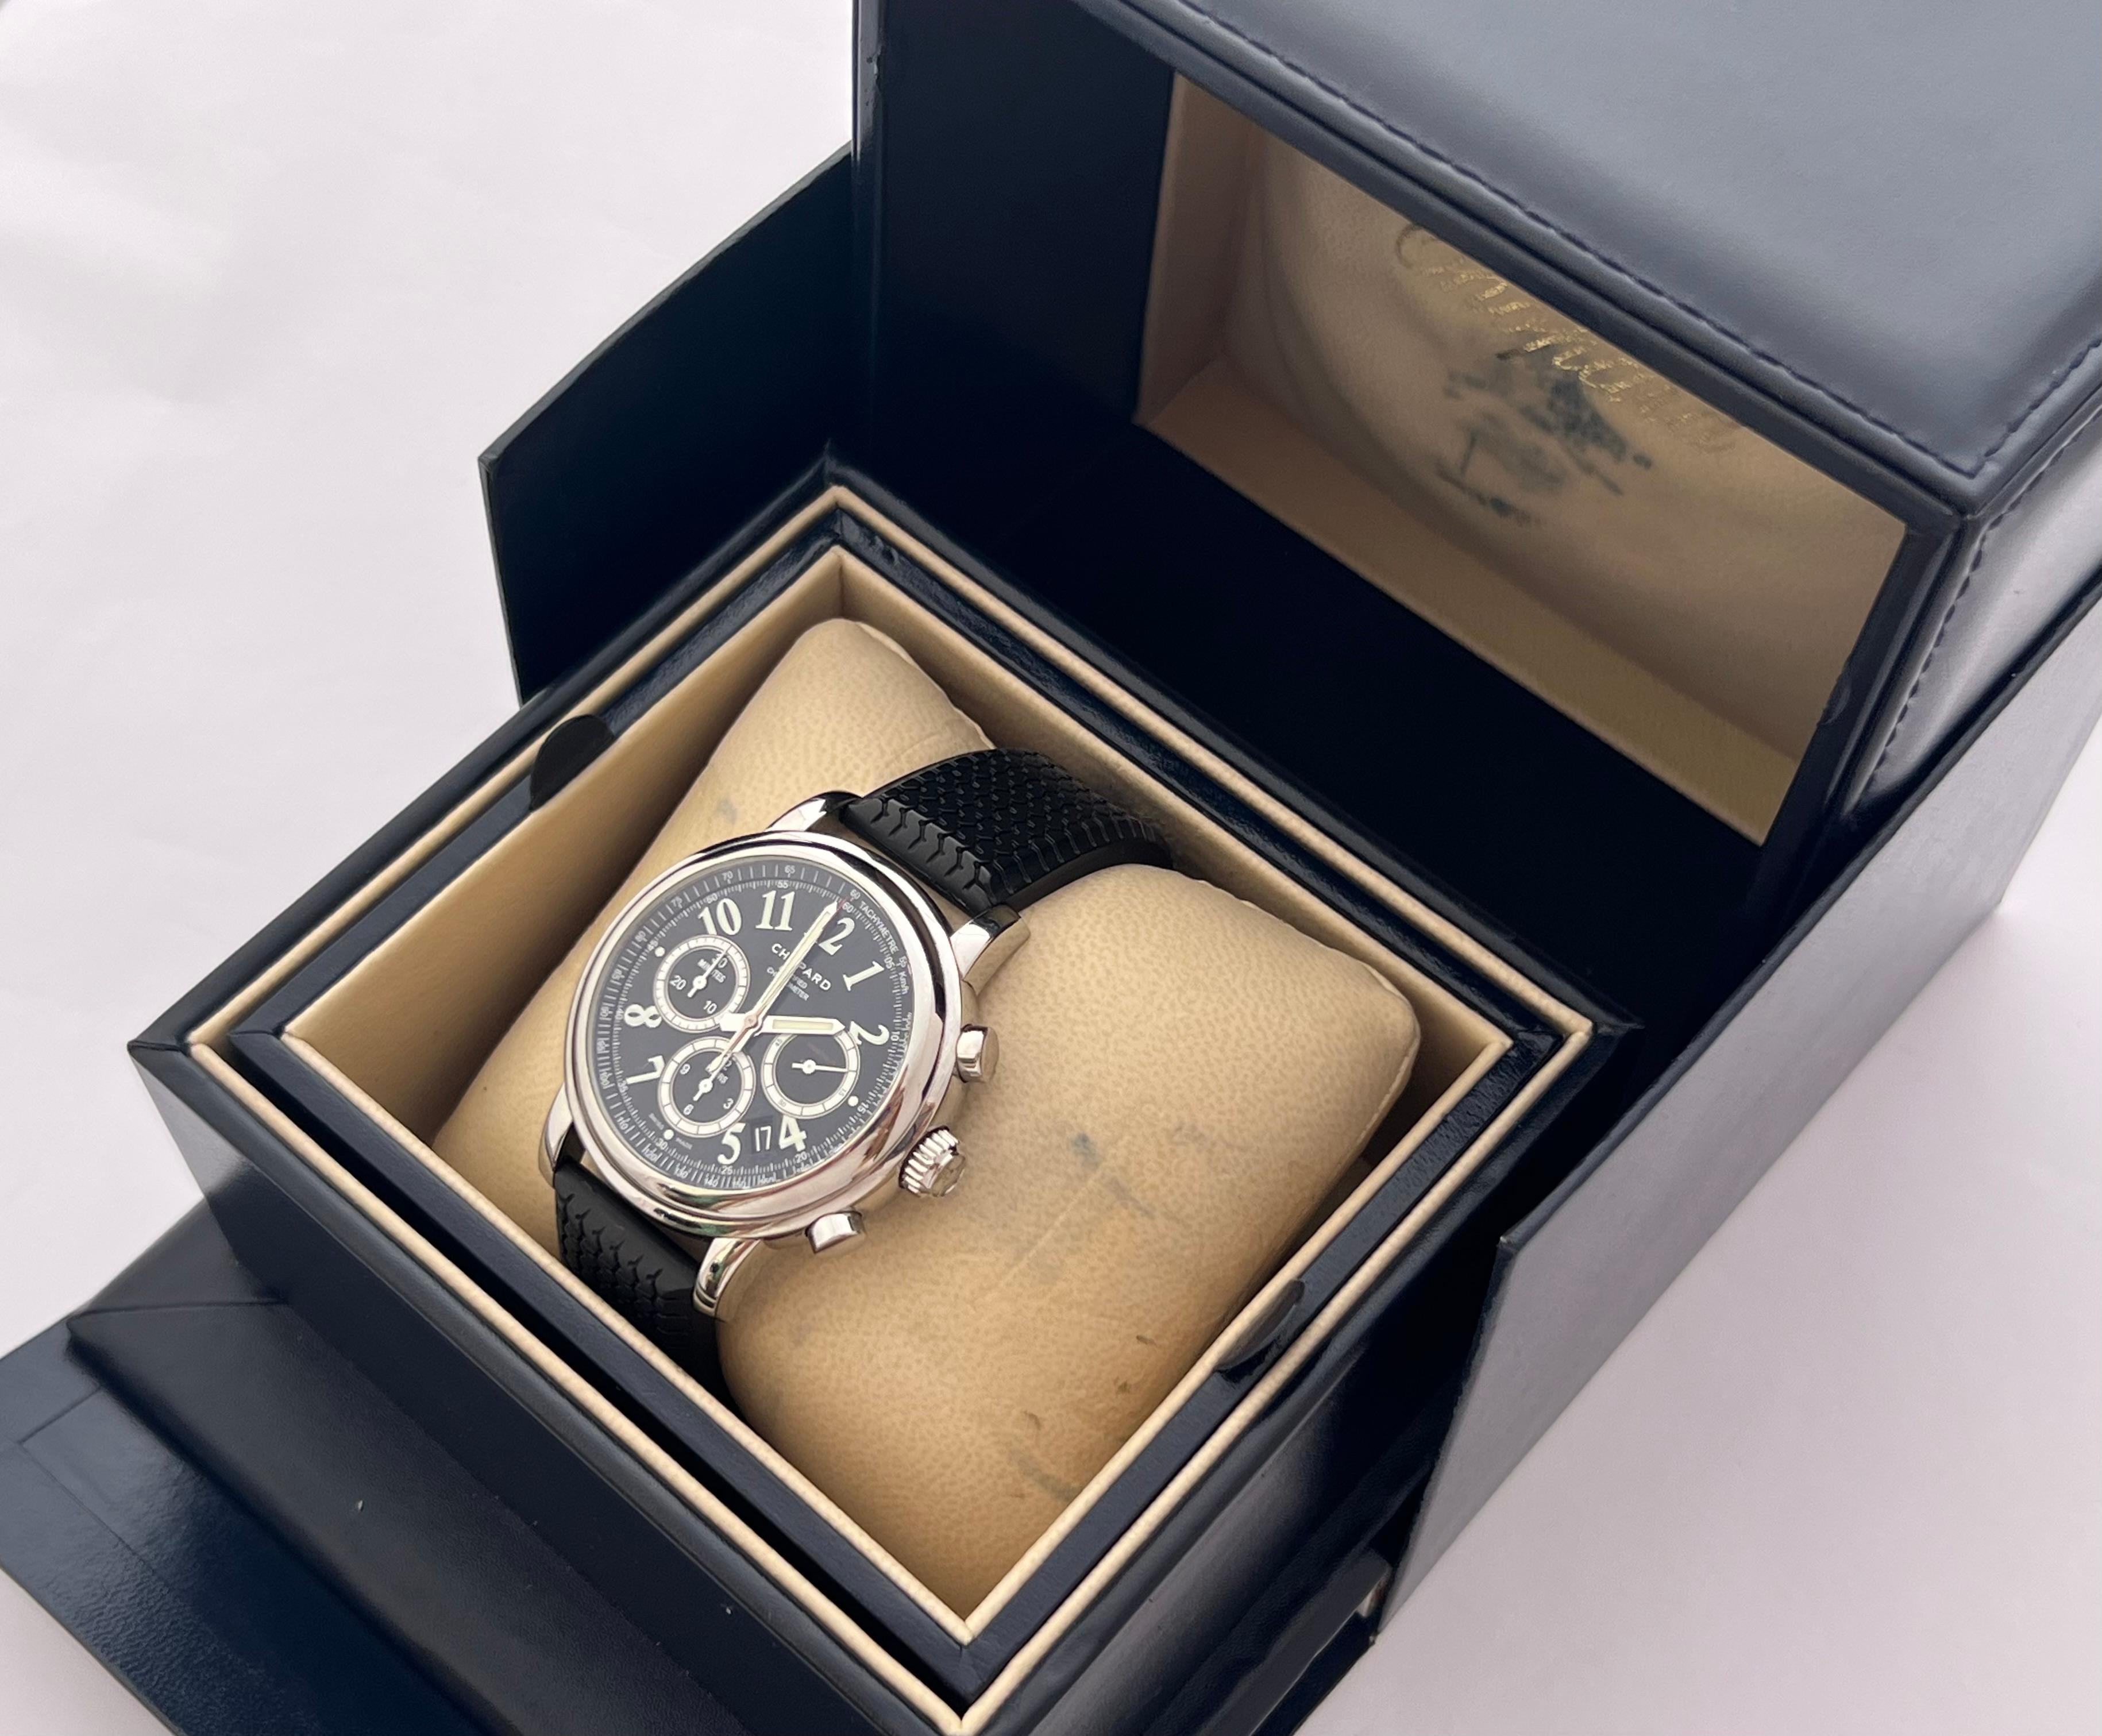 Brand : Chopard

Model: Mille Miglia

Reference Number : 8511 

Features : Sapphire crystal . Water resistant: 50 m . Chronograph.

Country Of Manufacture: Switzerland

Movement: Automatic

Case Material: SS

Measurements : 42mm diameter (excluding